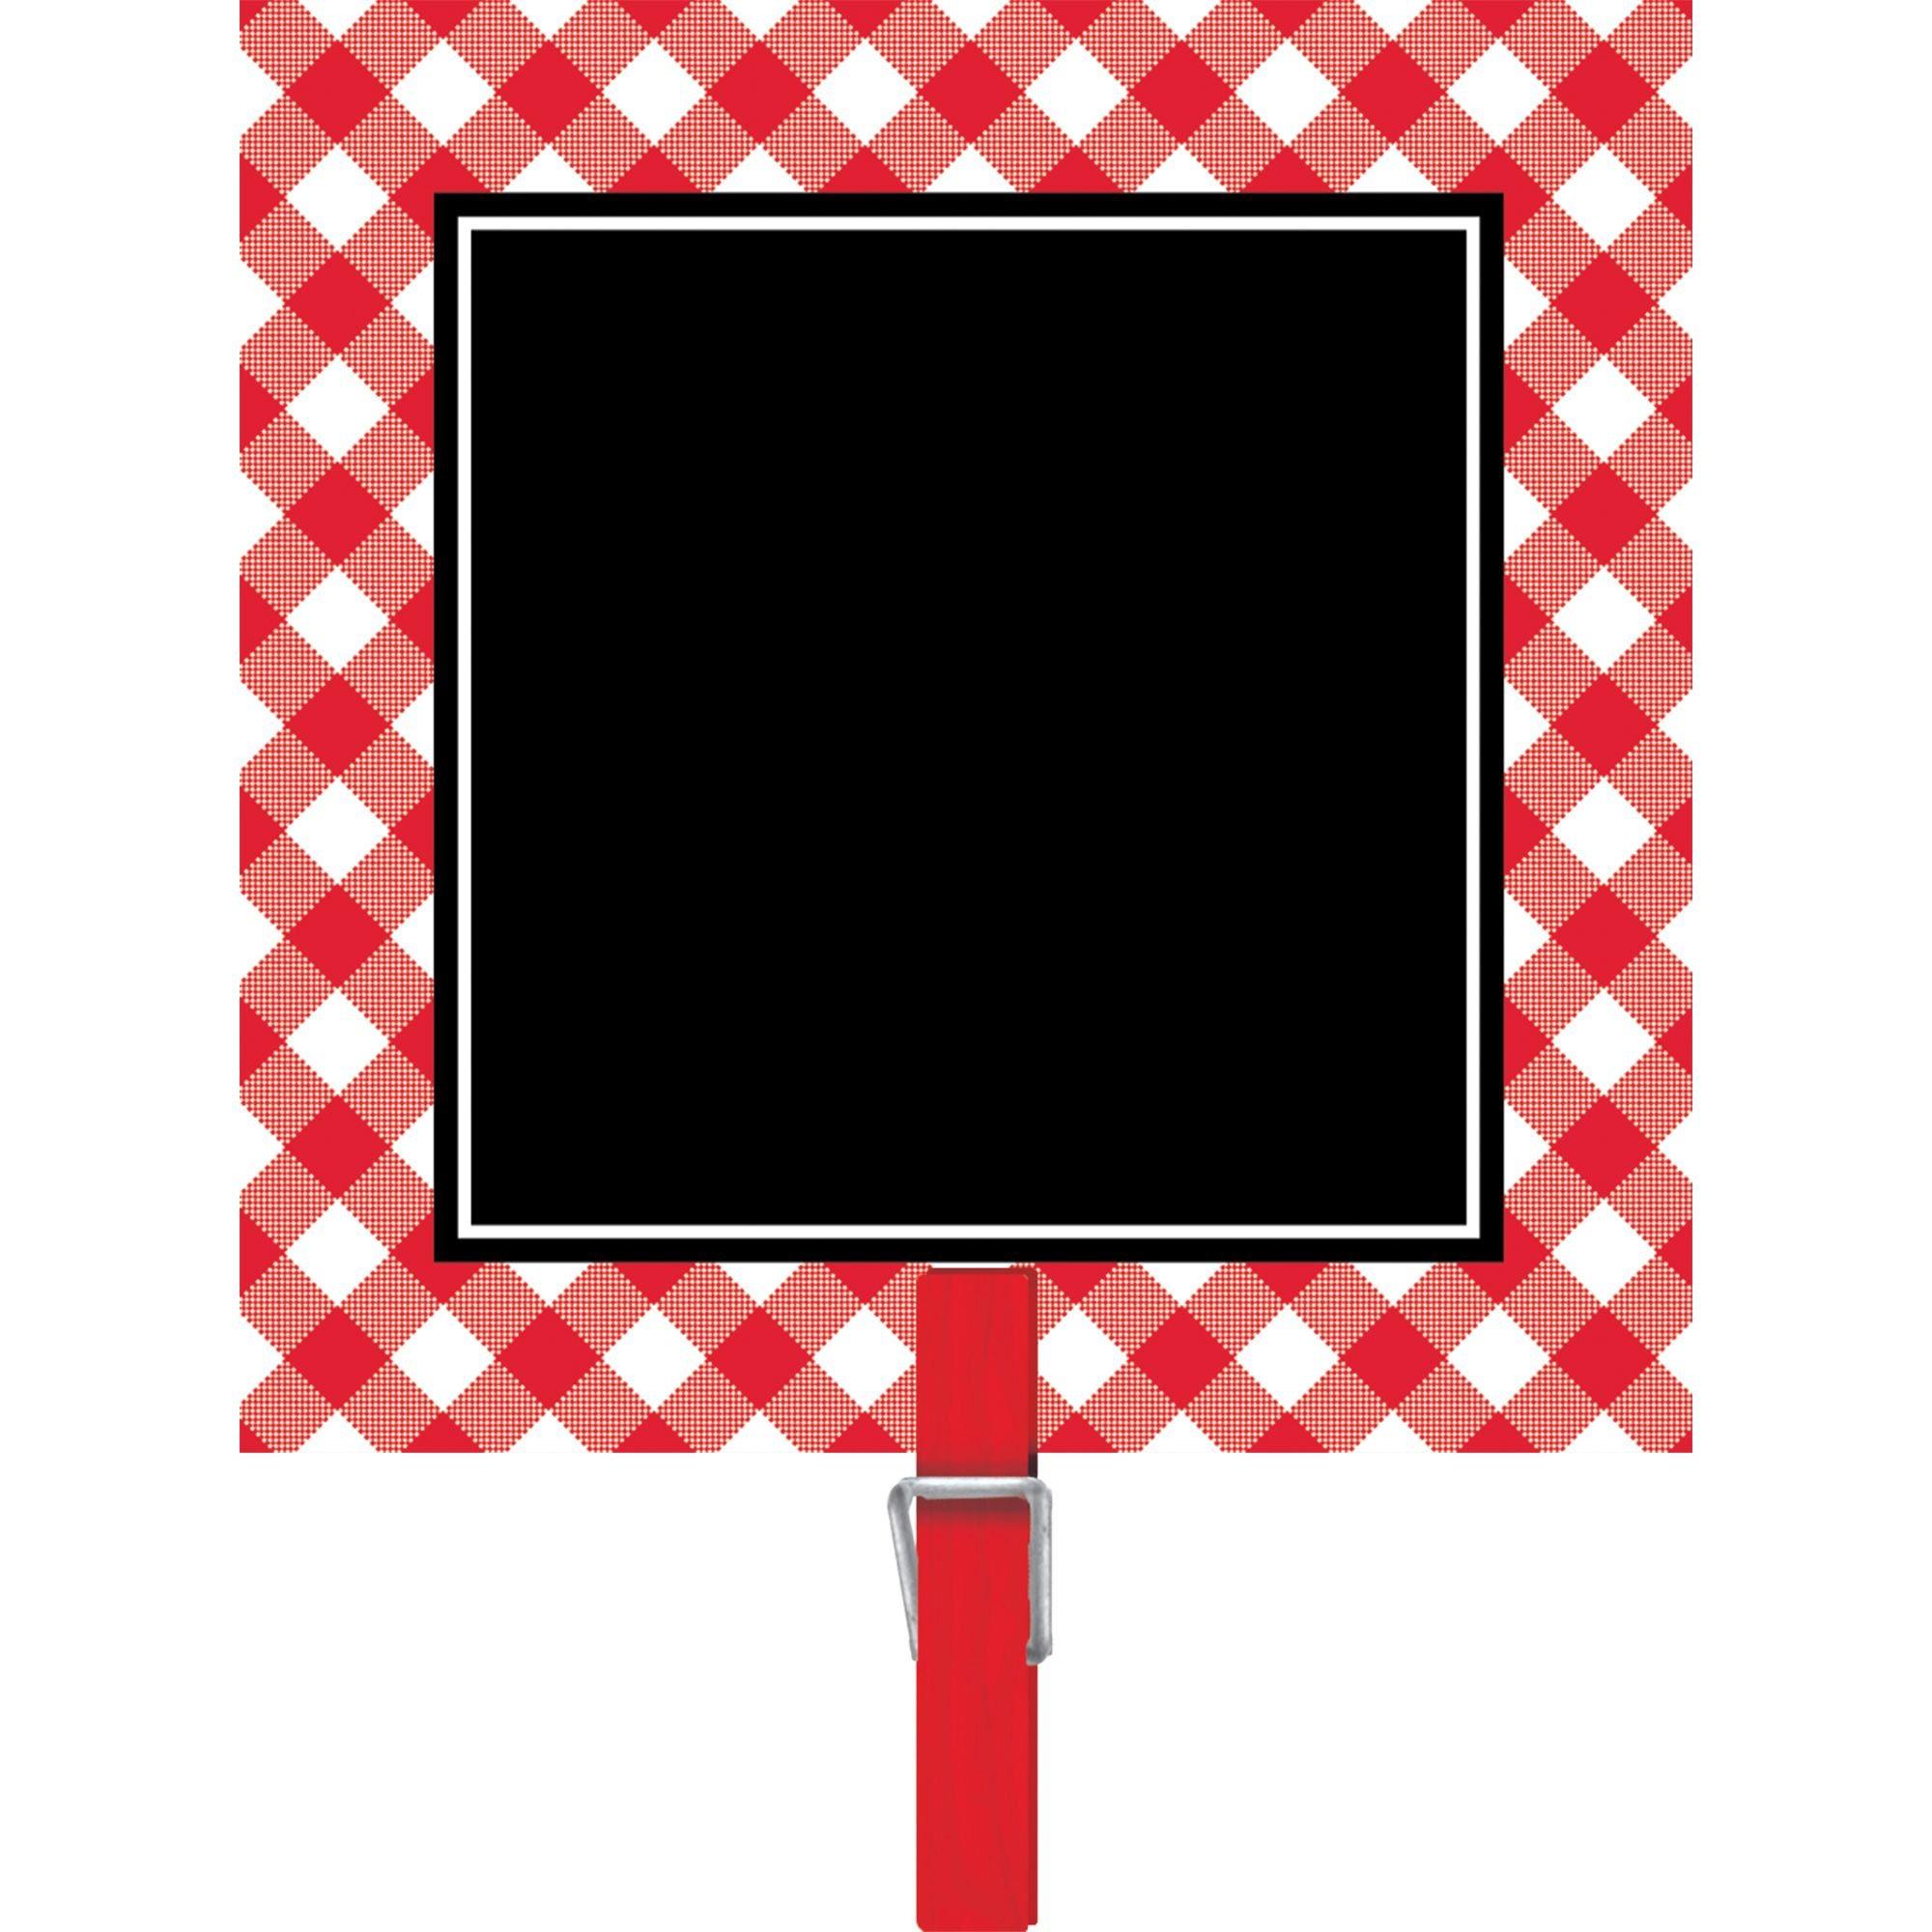 Picnic Party Red Gingham Chalkboard Clips 8ct